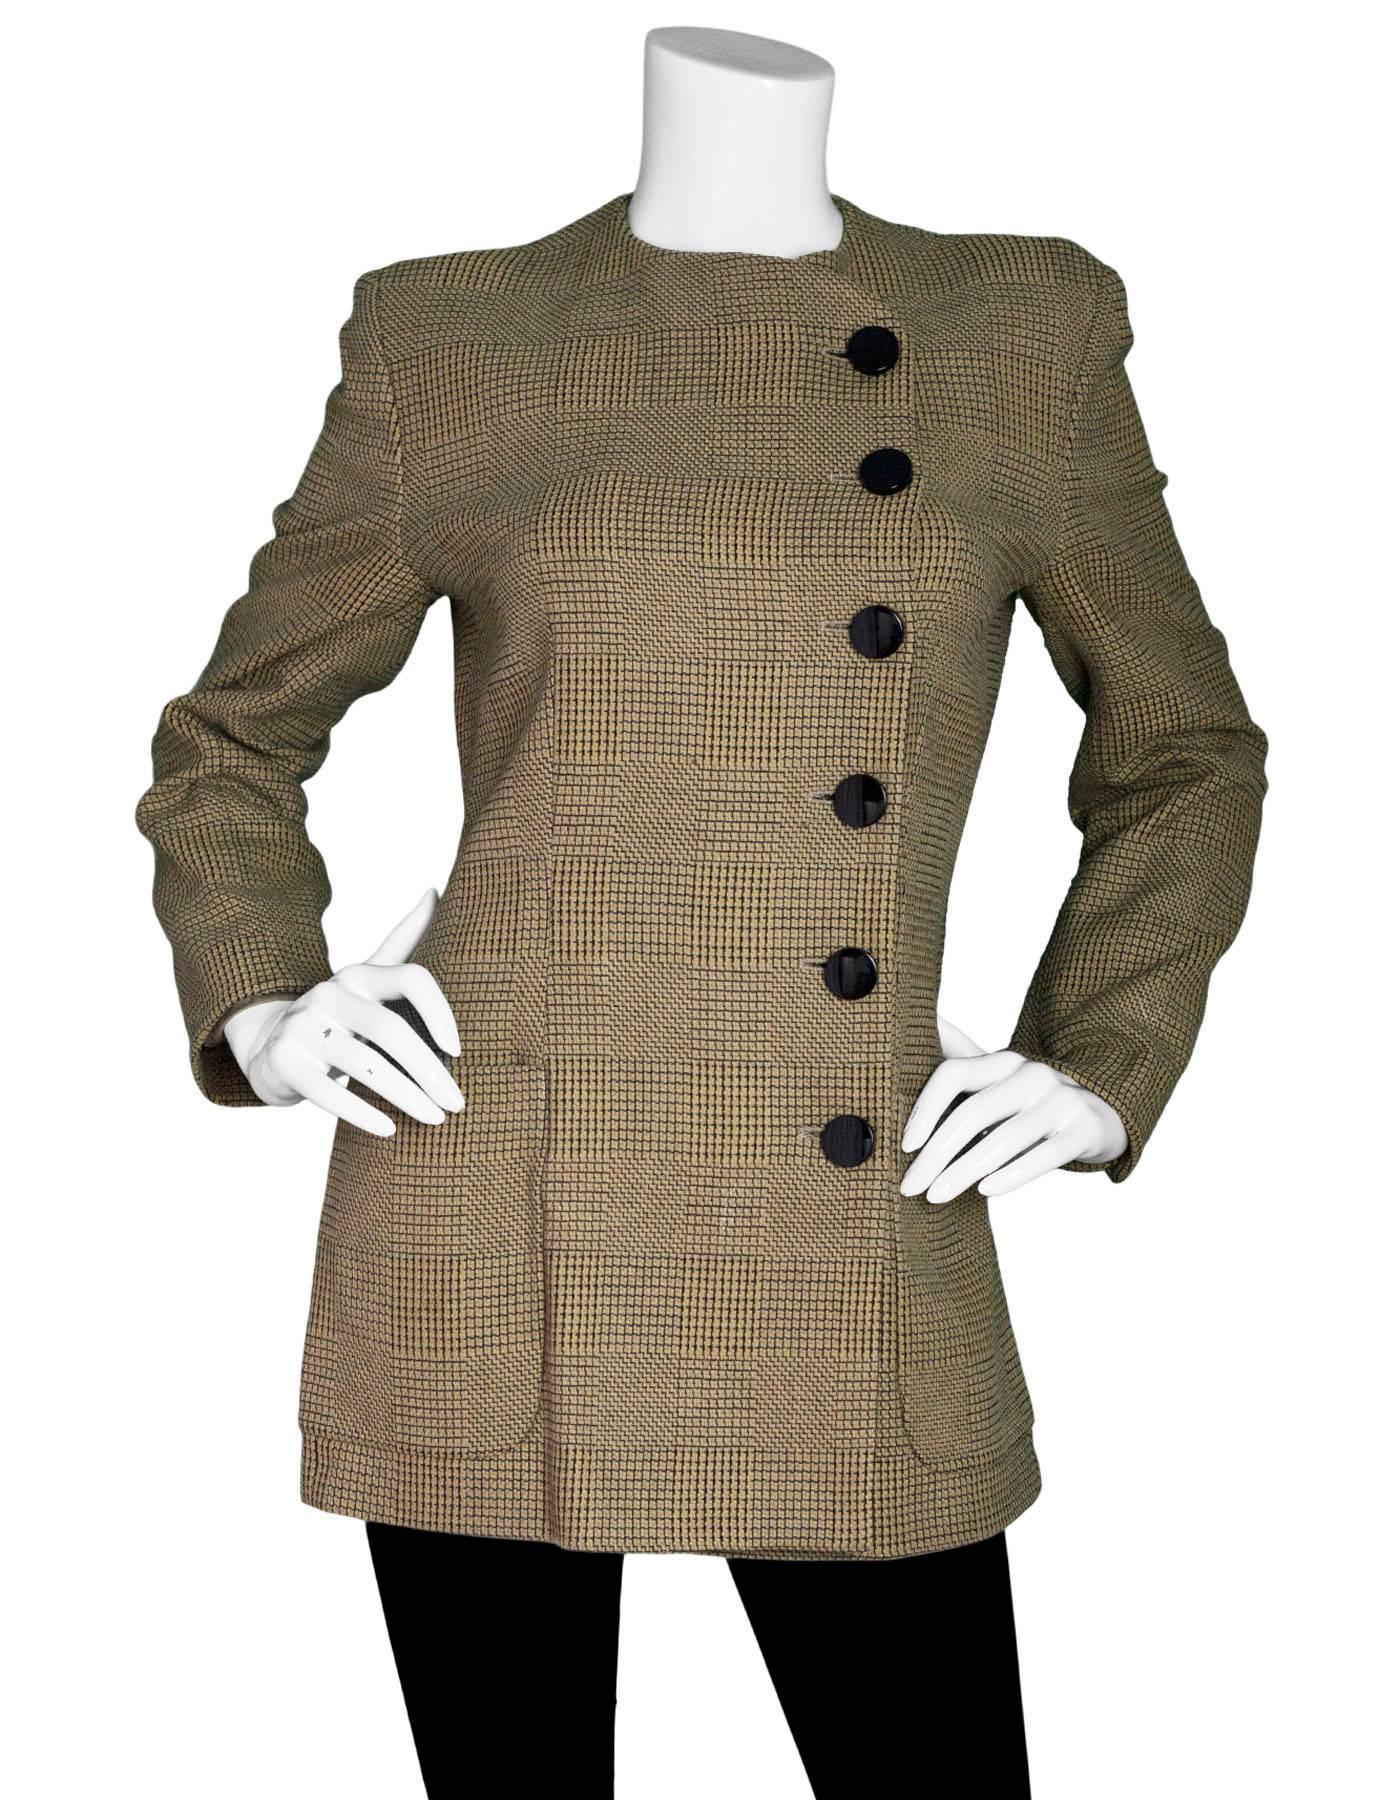 Giorgio Armani Vintage Plaid Asymmetrical Jacket Sz IT42

Made In: Italy
Color: Beige plaid
Composition: Not listed, feels like wool blend
Lining: Textile
Closure/Opening: Front button closure
Exterior Pockets: Hip patch pockets
Interior Pockets: